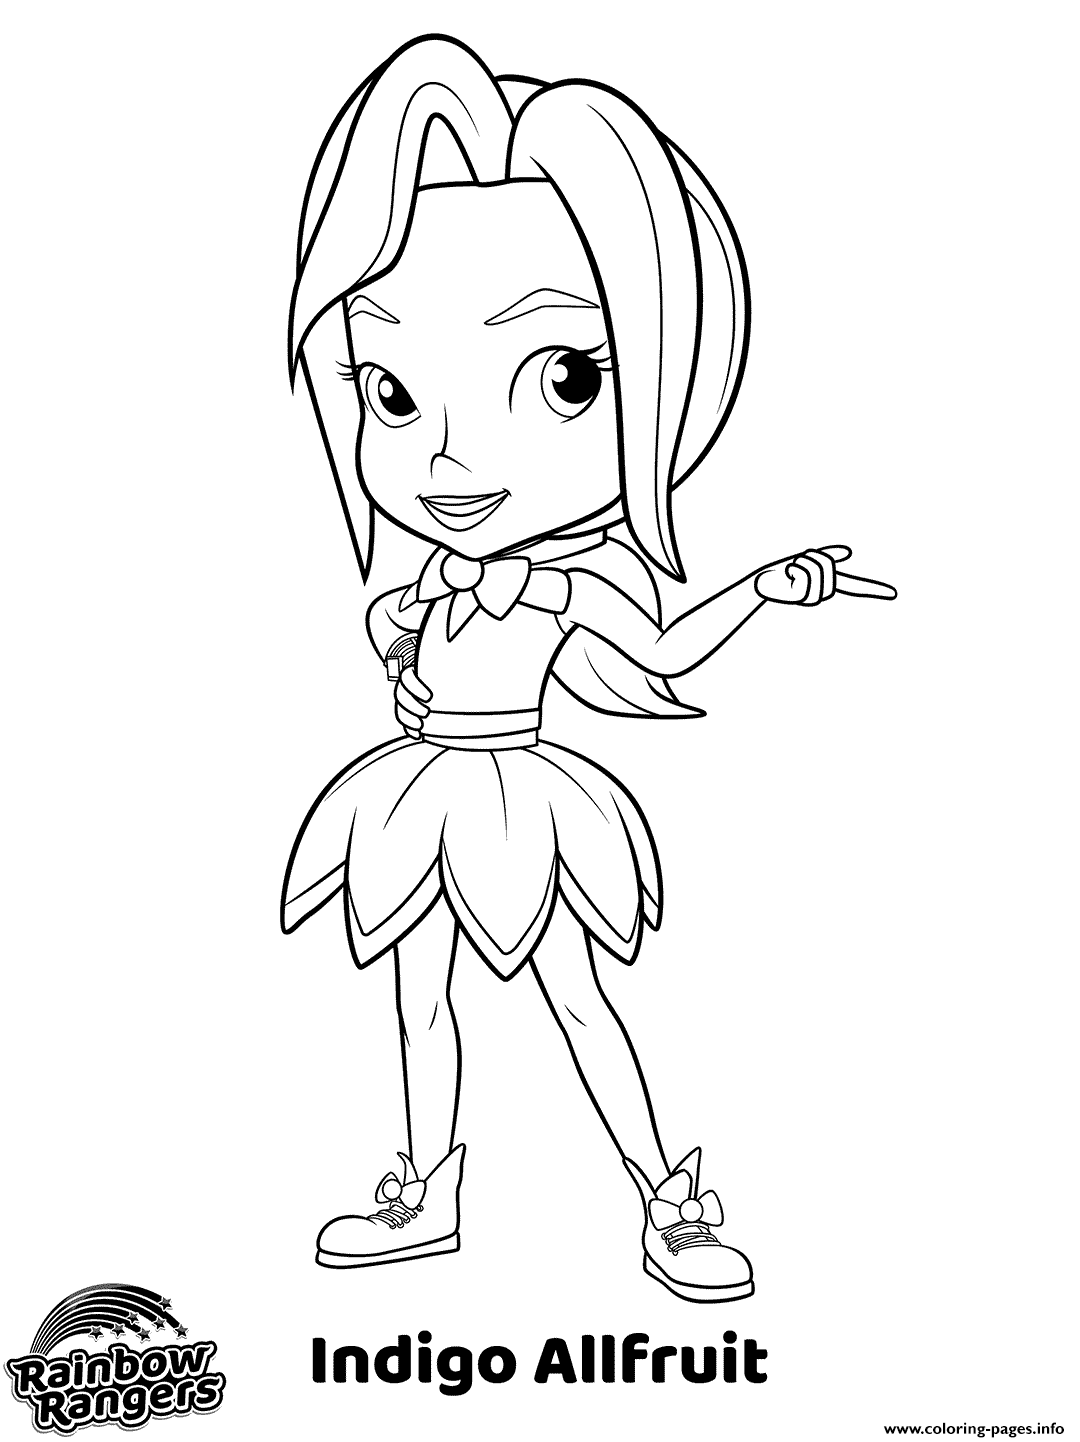 Prankster Rainbow Rangers Coloring Pages Printable